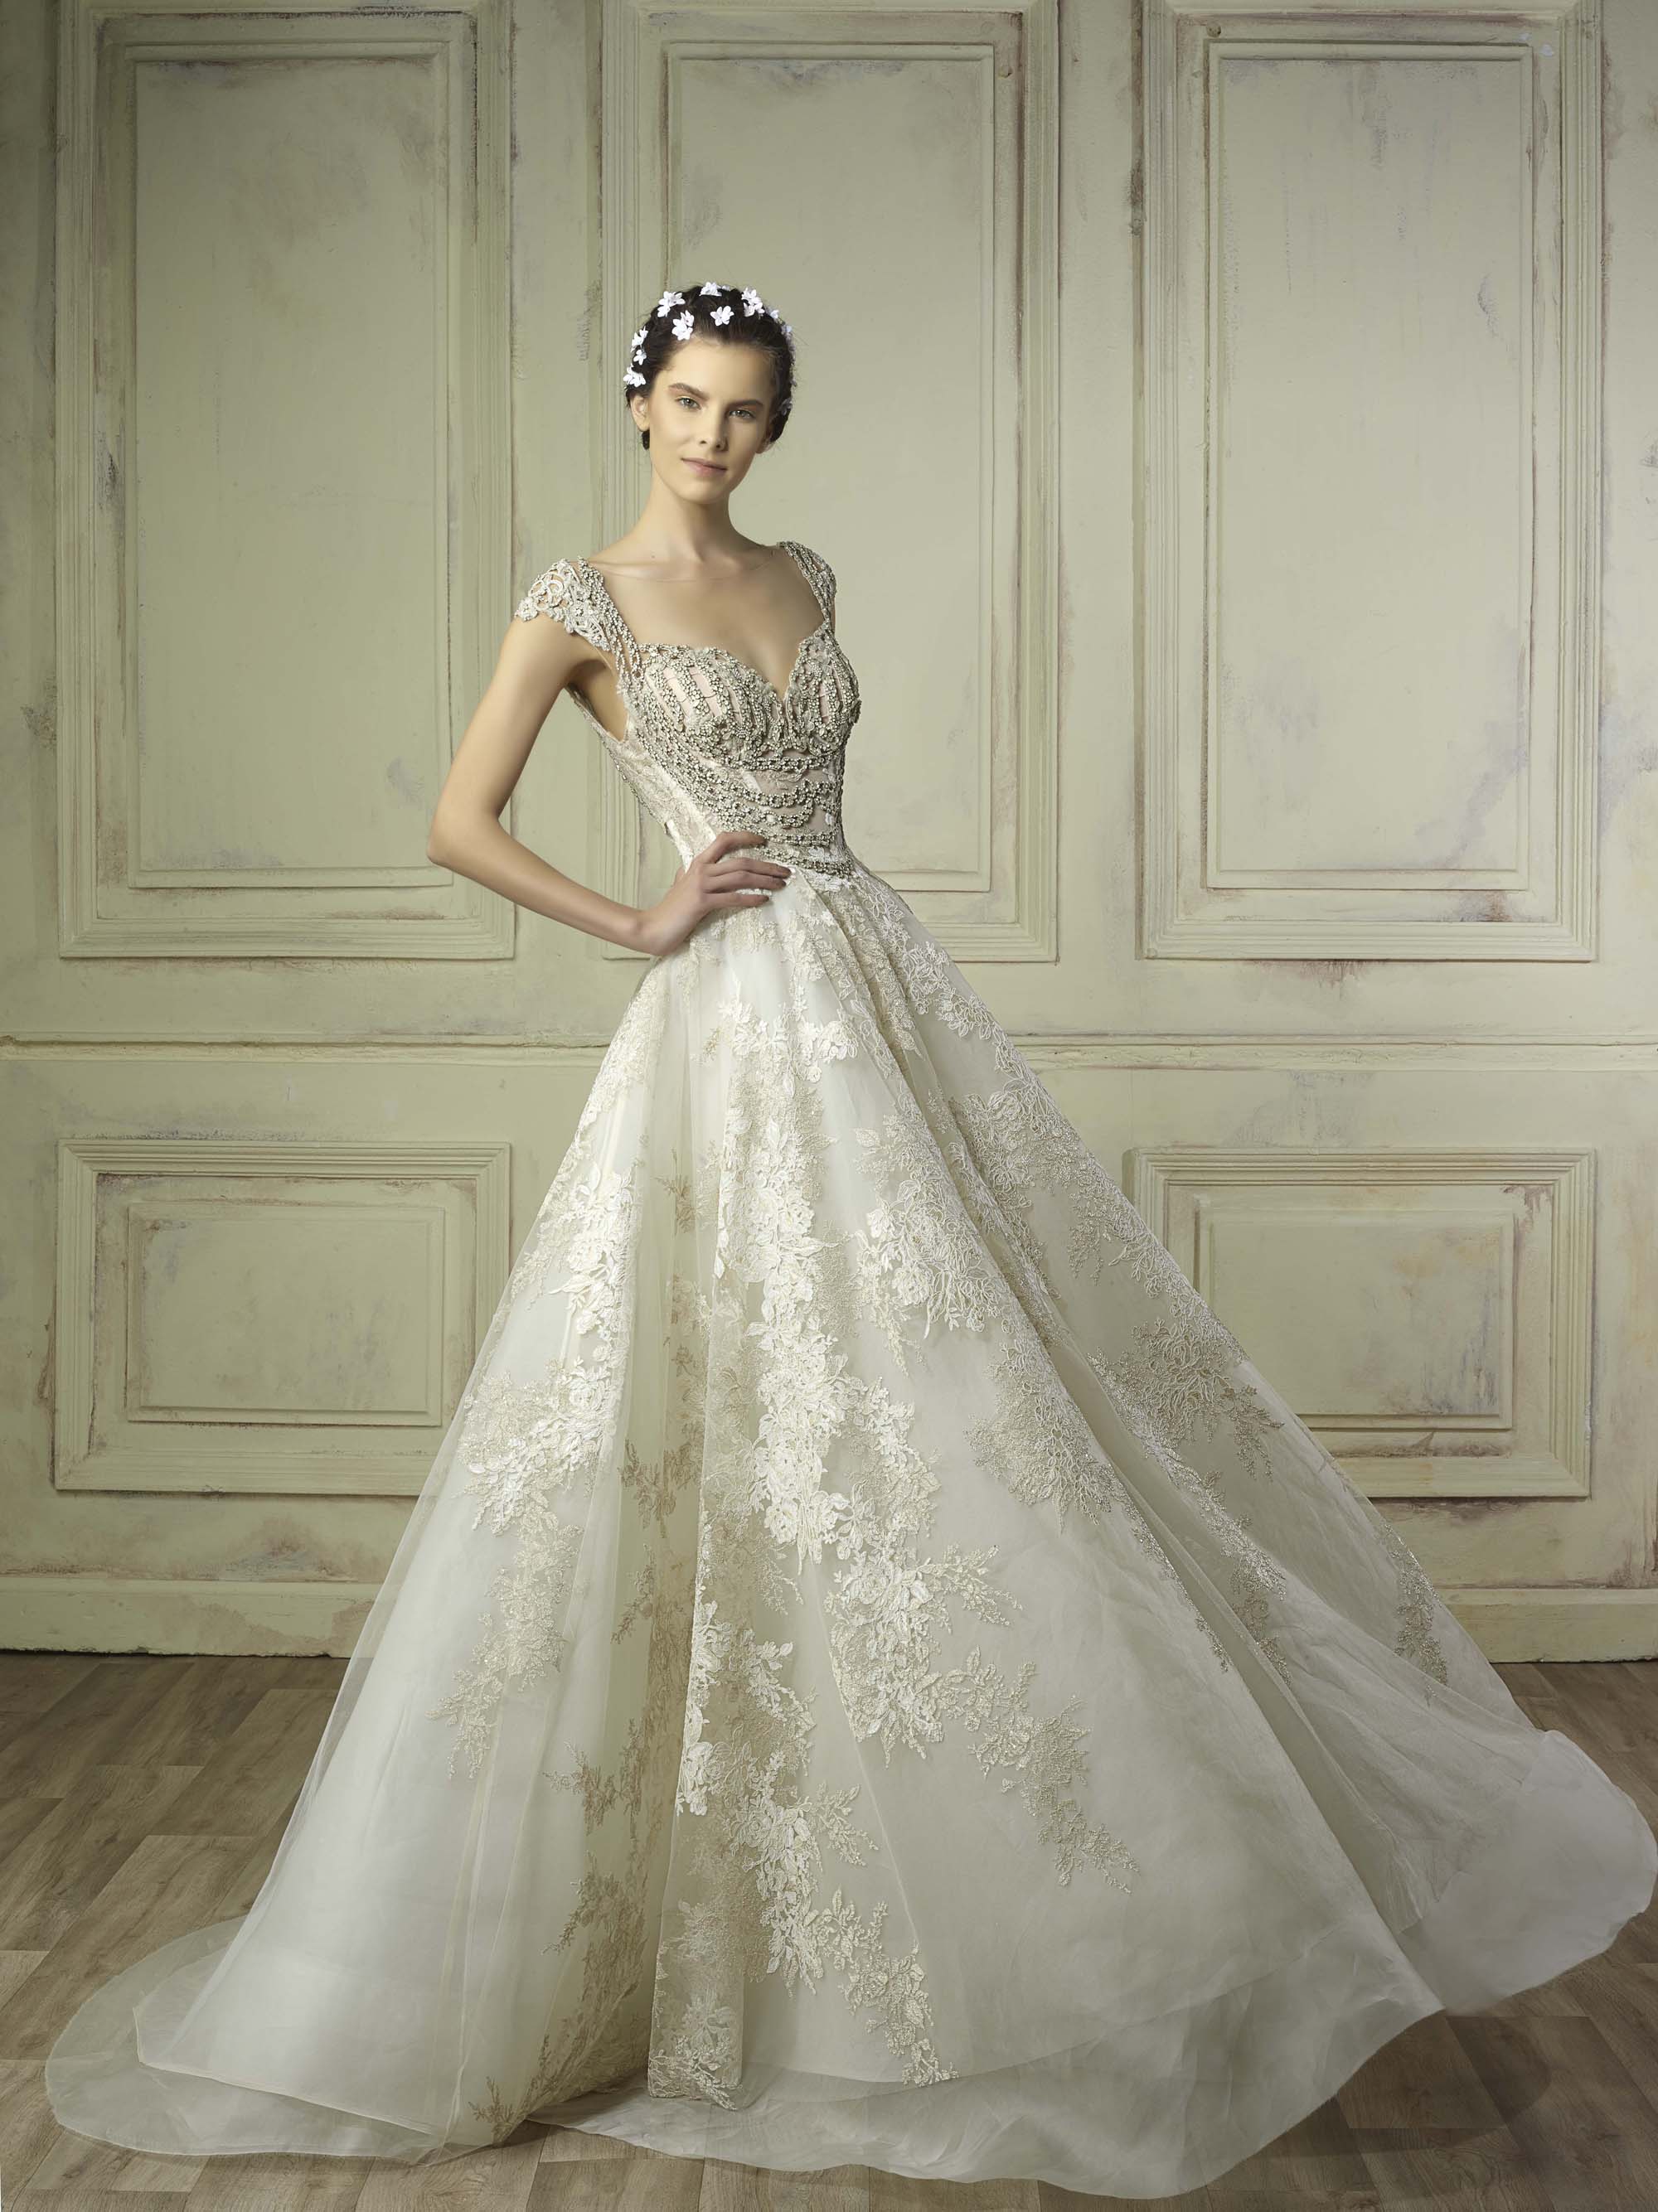 The Latest 2018 Gemy Maalouf Bridal Collection - Arabia ...